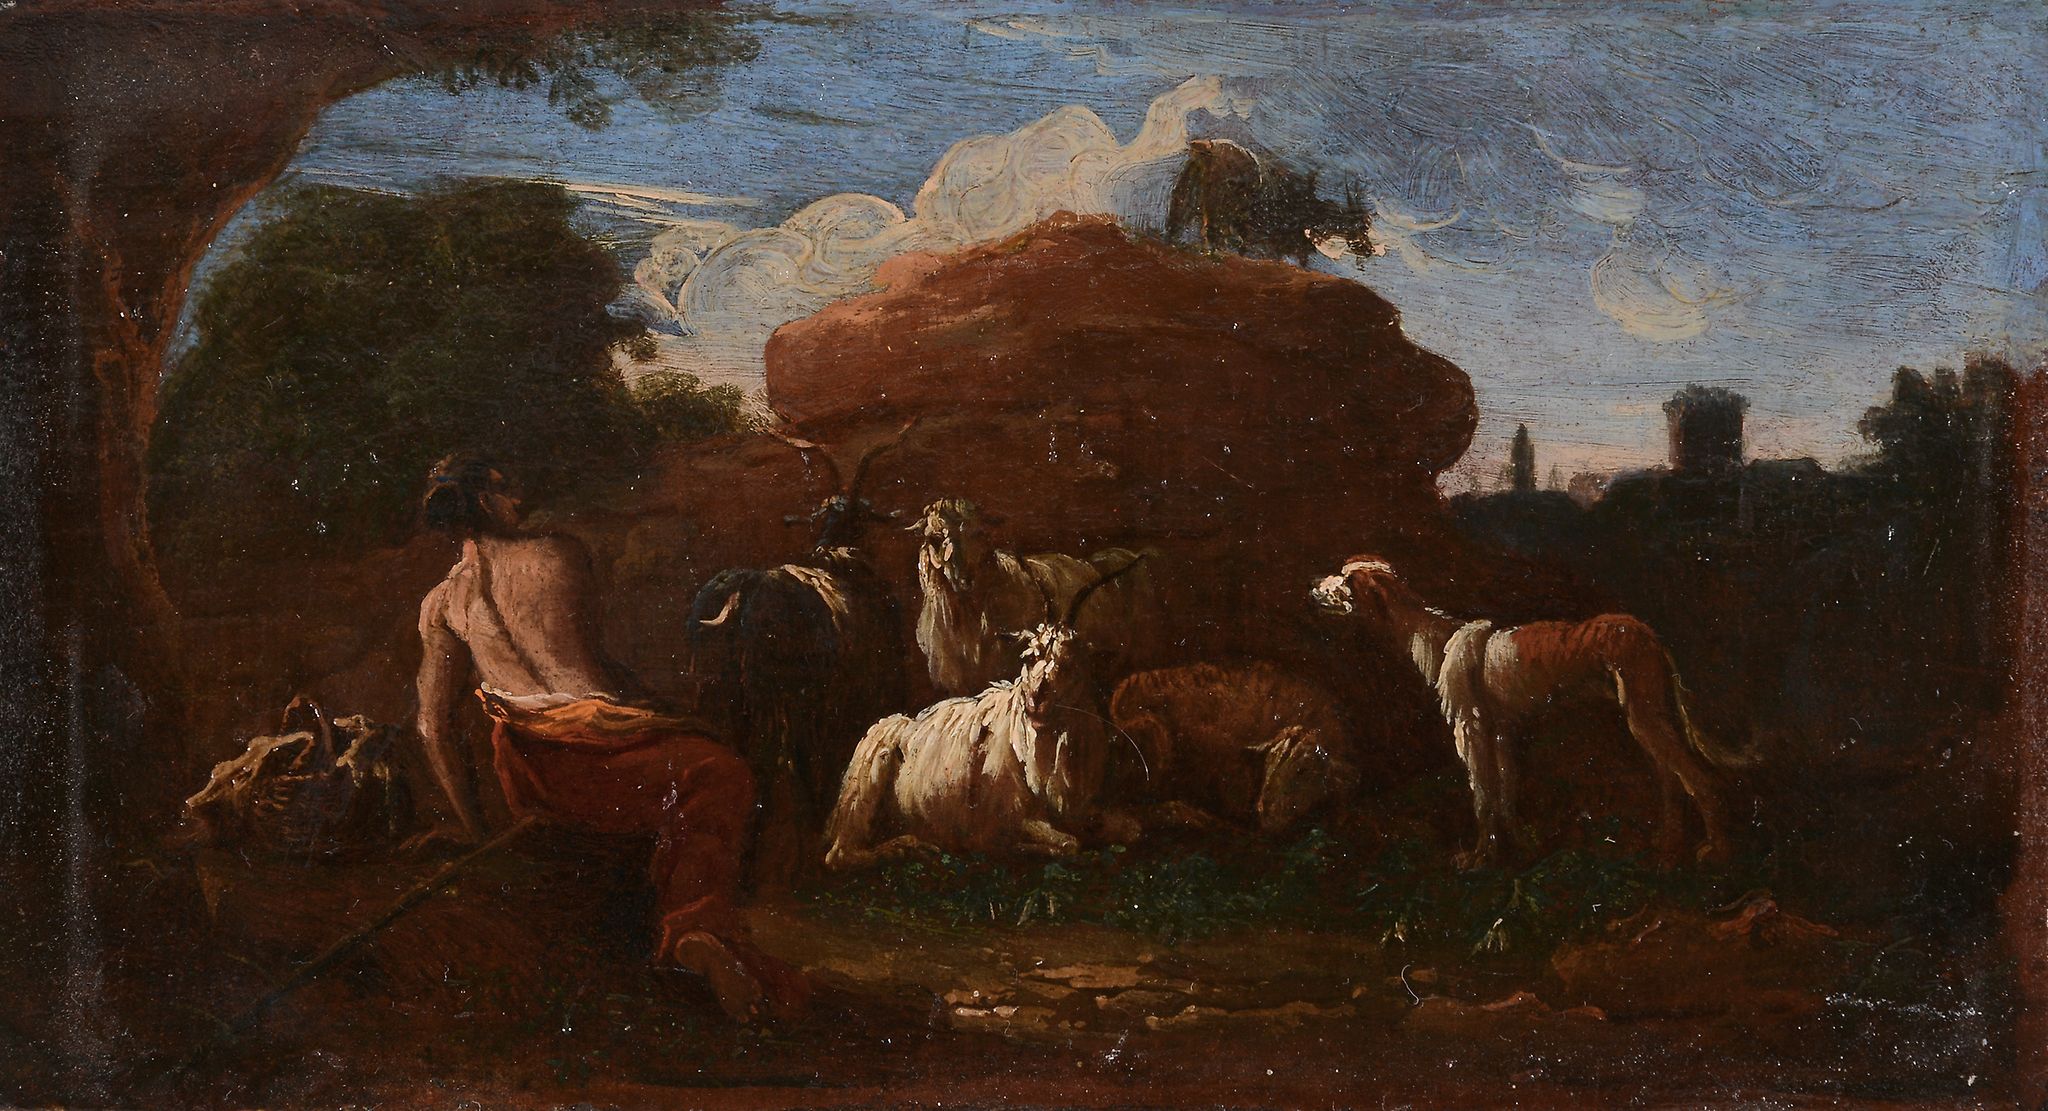 Follower of Philipp Peter Roos (1657-1706) - Goatherd resting with cattle, goats, and sheep, in an